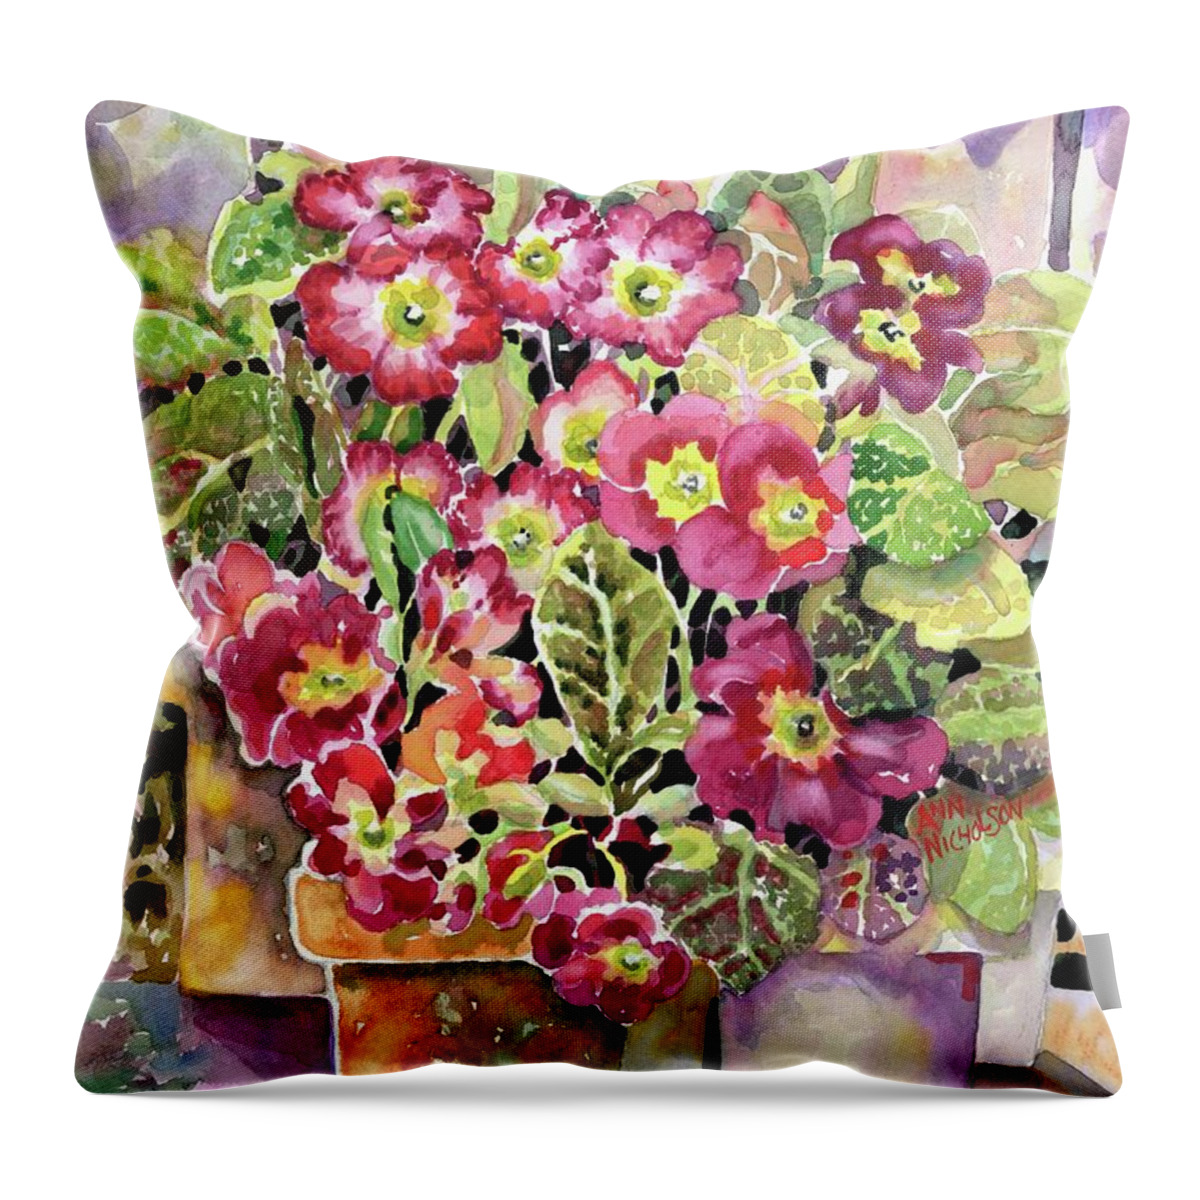 Watercolor Throw Pillow featuring the painting Primroses In Pots #1 by Ann Nicholson